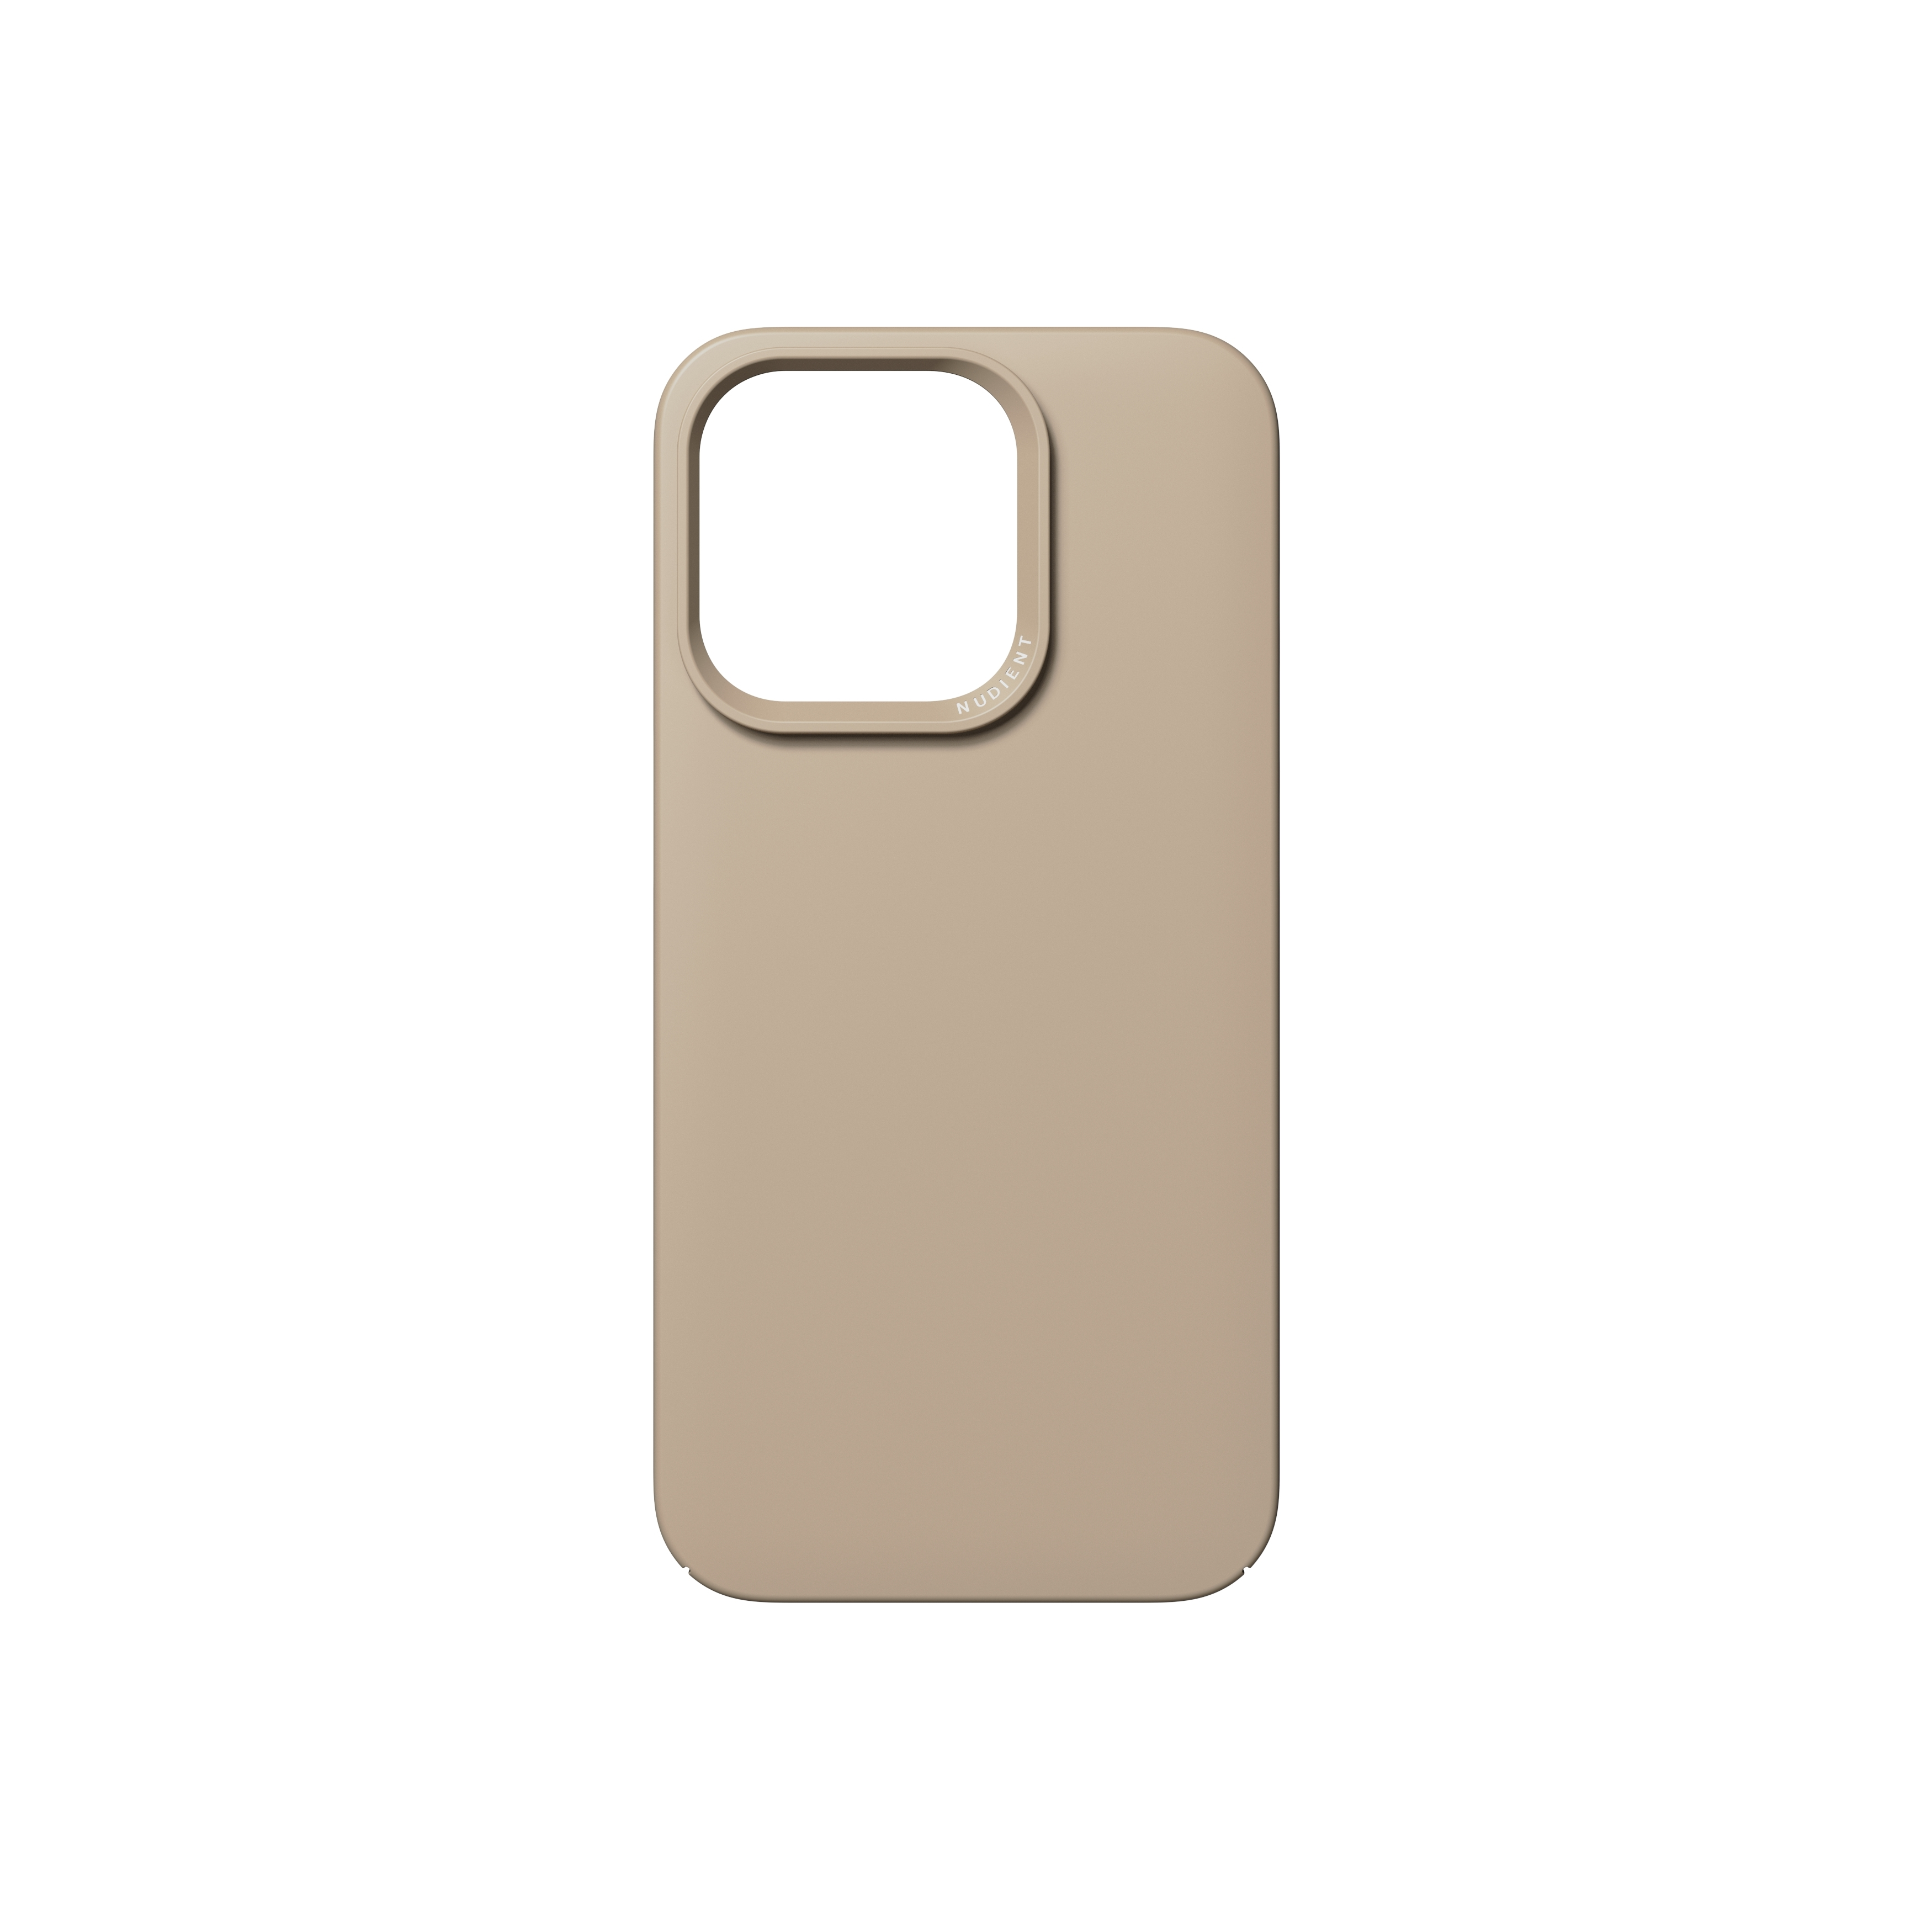 14 Thin, PRO, APPLE, NUDIENT IPHONE Backcover, SAND